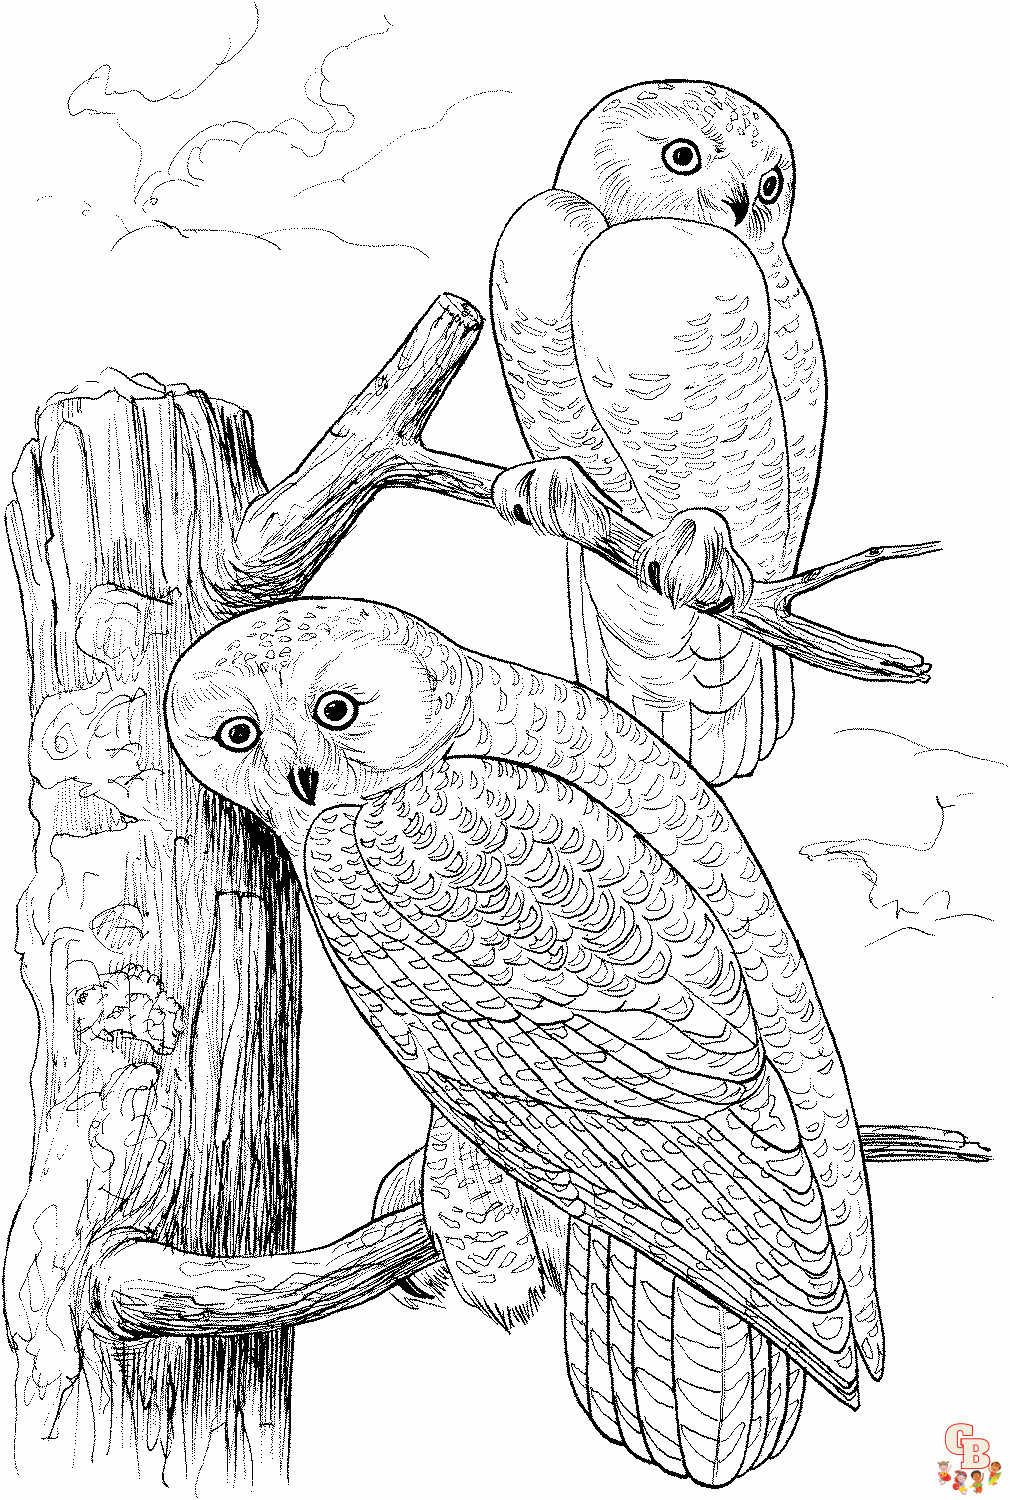 https://gbcoloring.com/wp-content/uploads/2023/04/Snowy-Owl-Coloring-Pages-for-Kids-1.gif